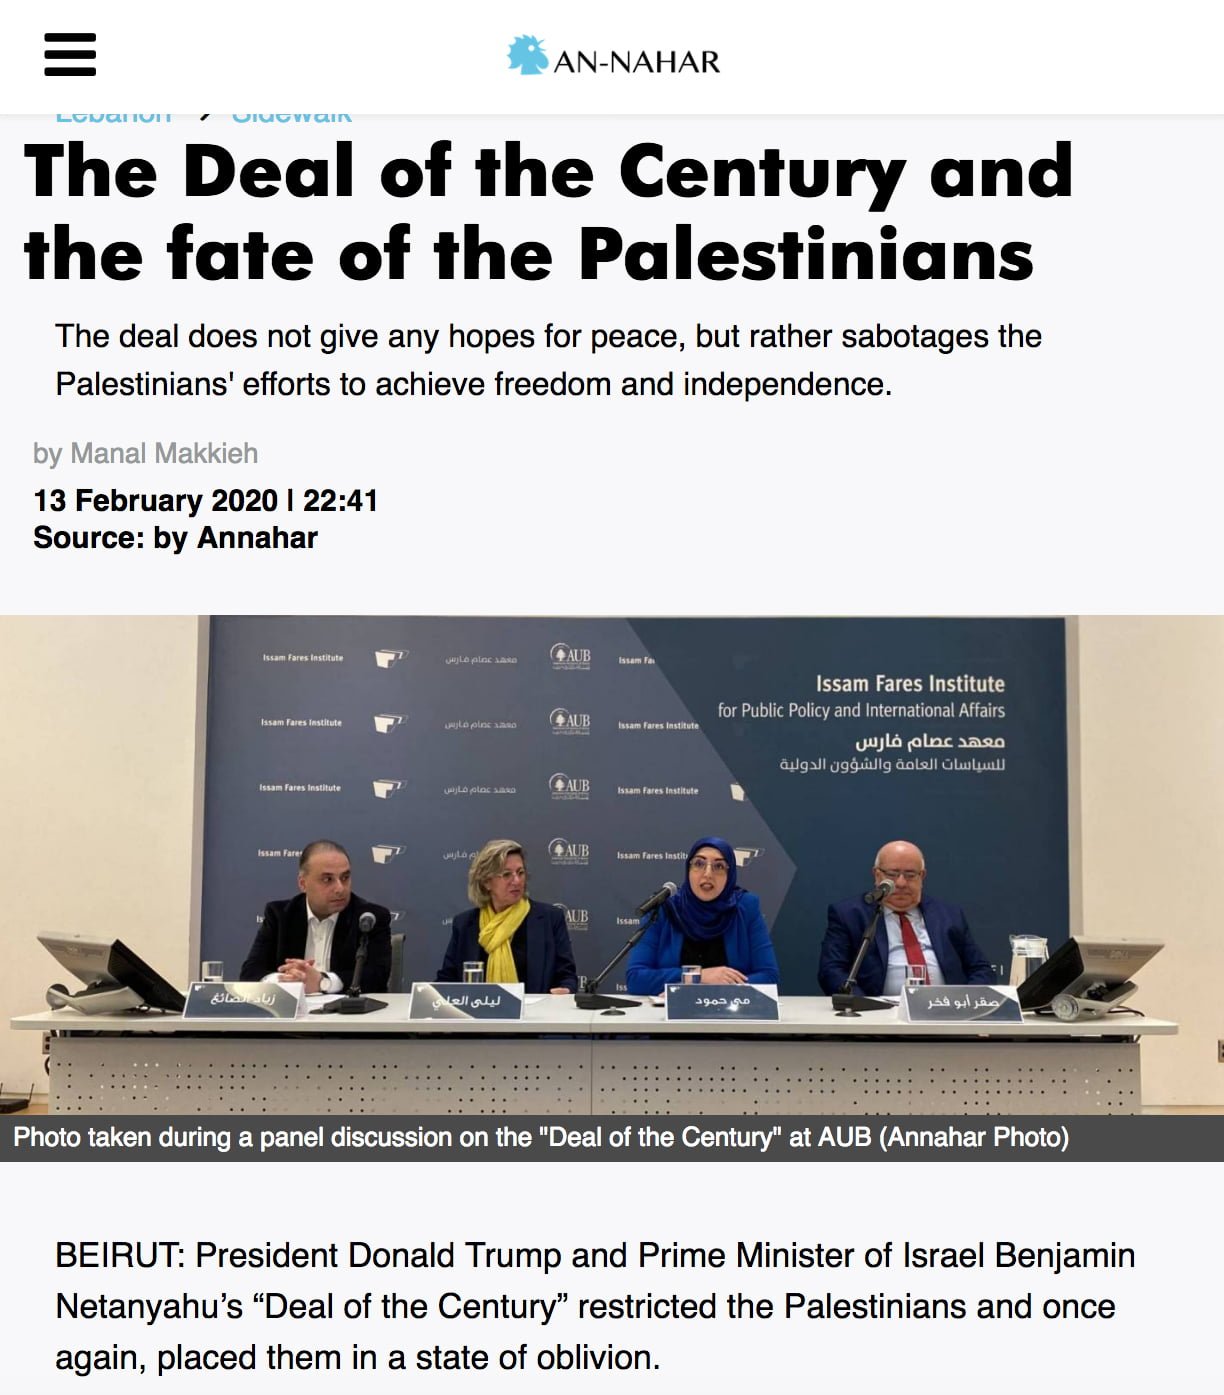 The Deal of the Century and the fate of the Palestinians